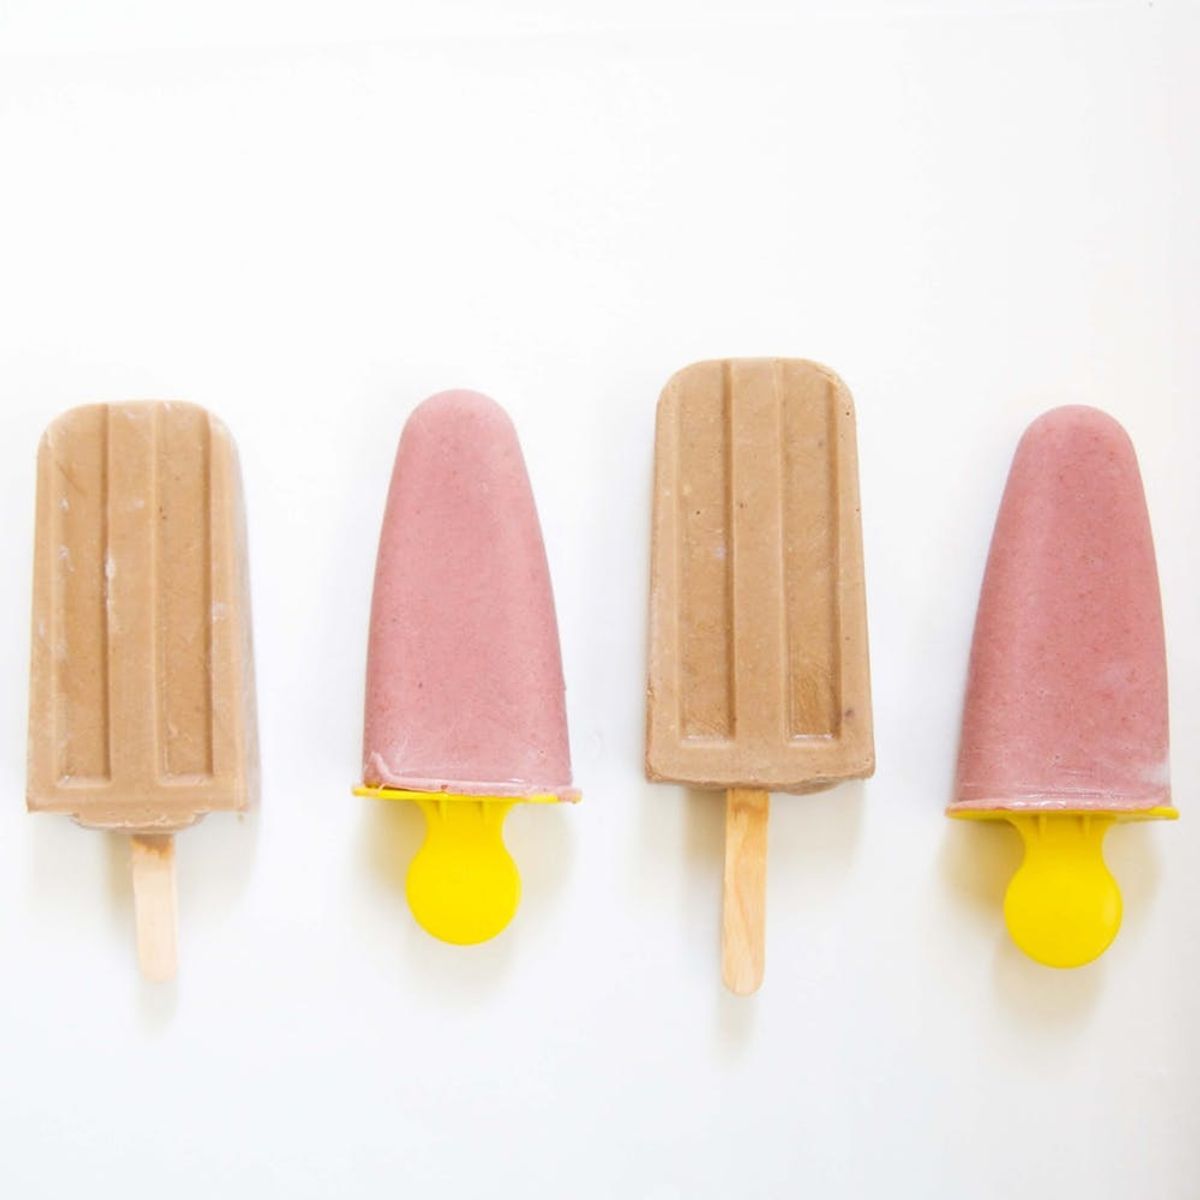 Cool Off and Fuel Up With These Protein Shake Popsicles